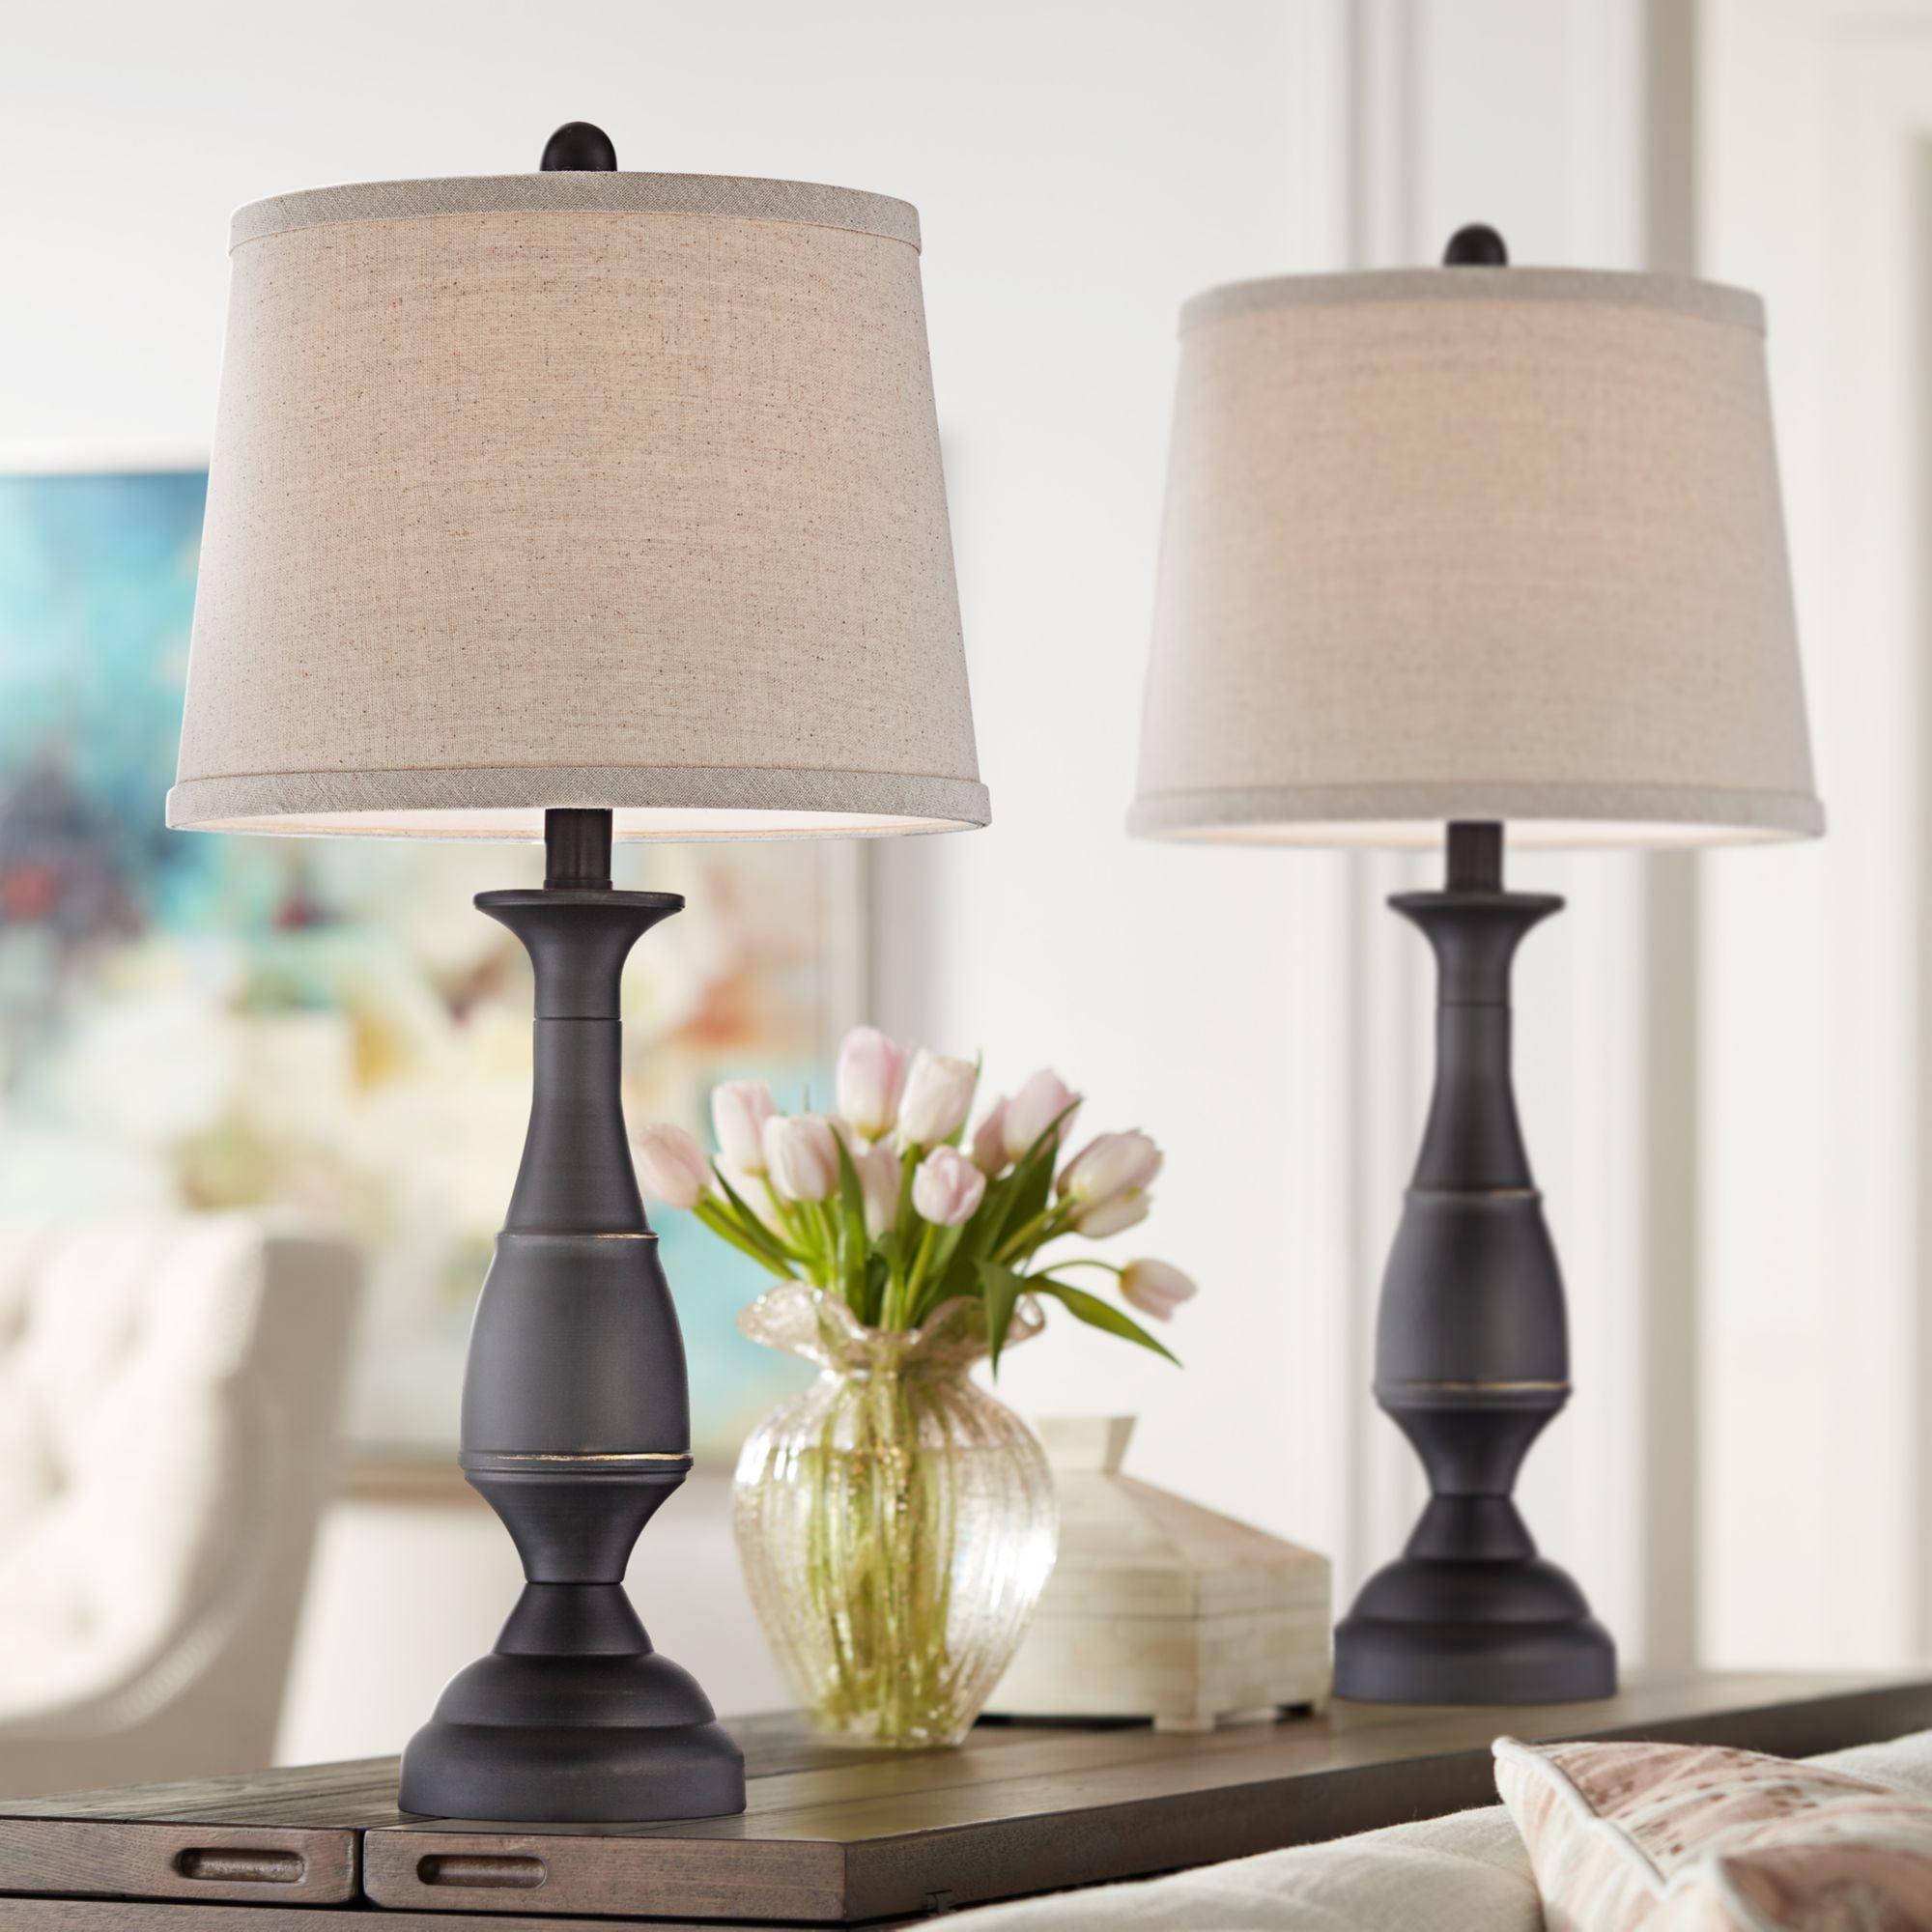 Regency Hill Traditional Table Lamps, Table Lamps For Living Room Ideas